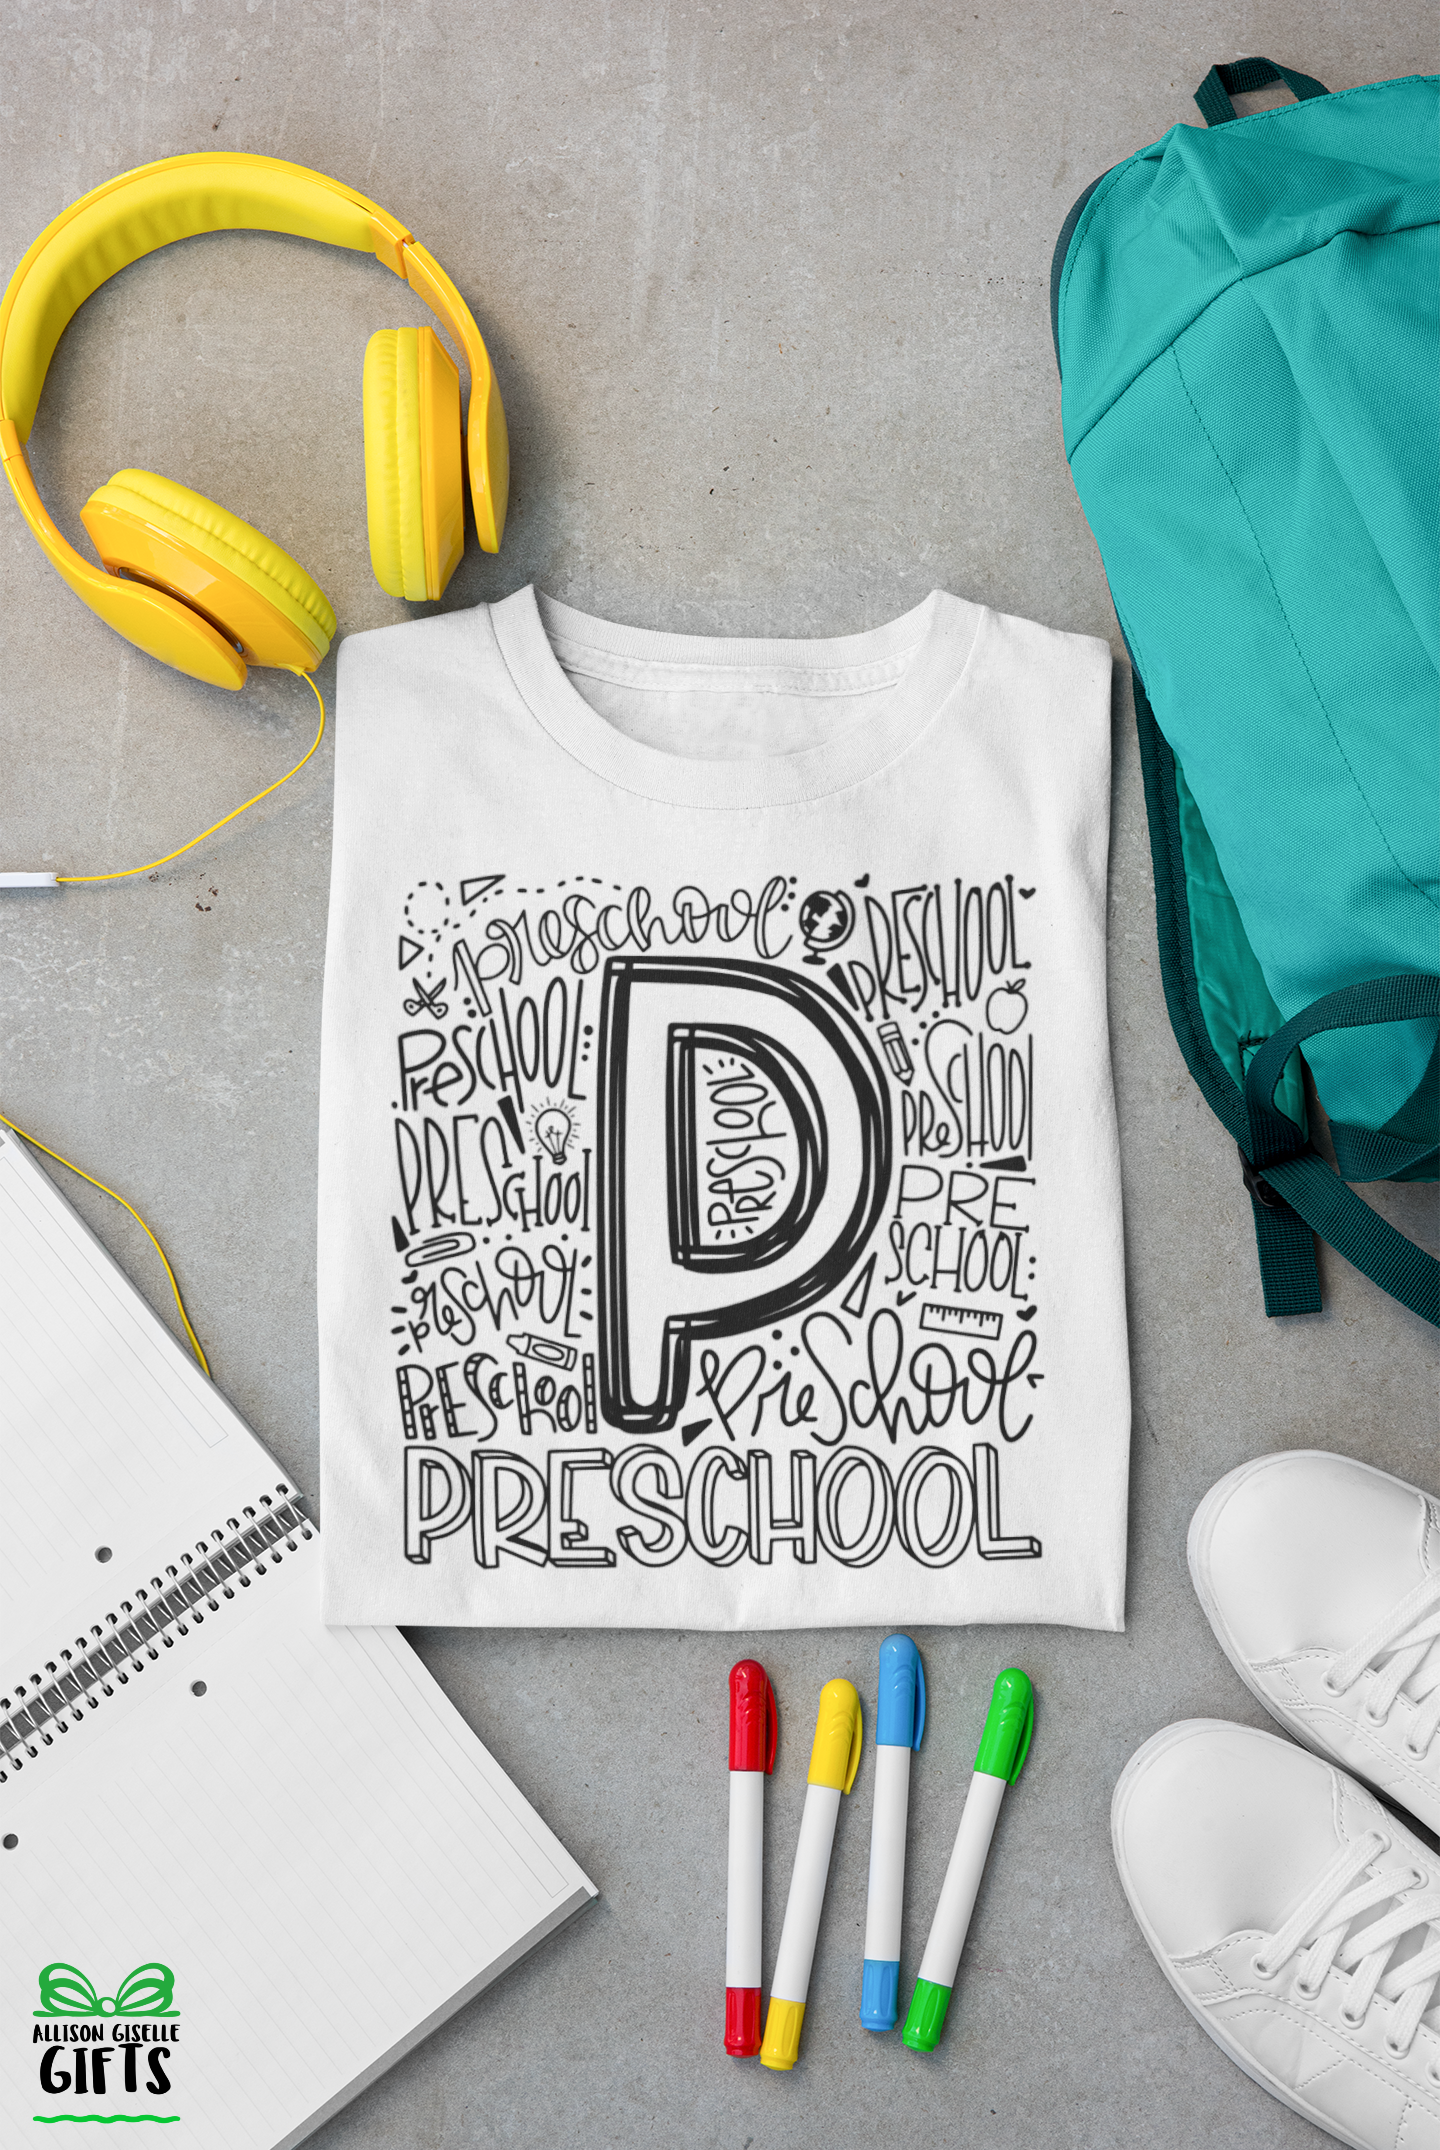 Typography Shirts-Grade Level Typography Shirts -First Day of School Shirt - Back To School Shirt - Personalized Typography Grade t shirt